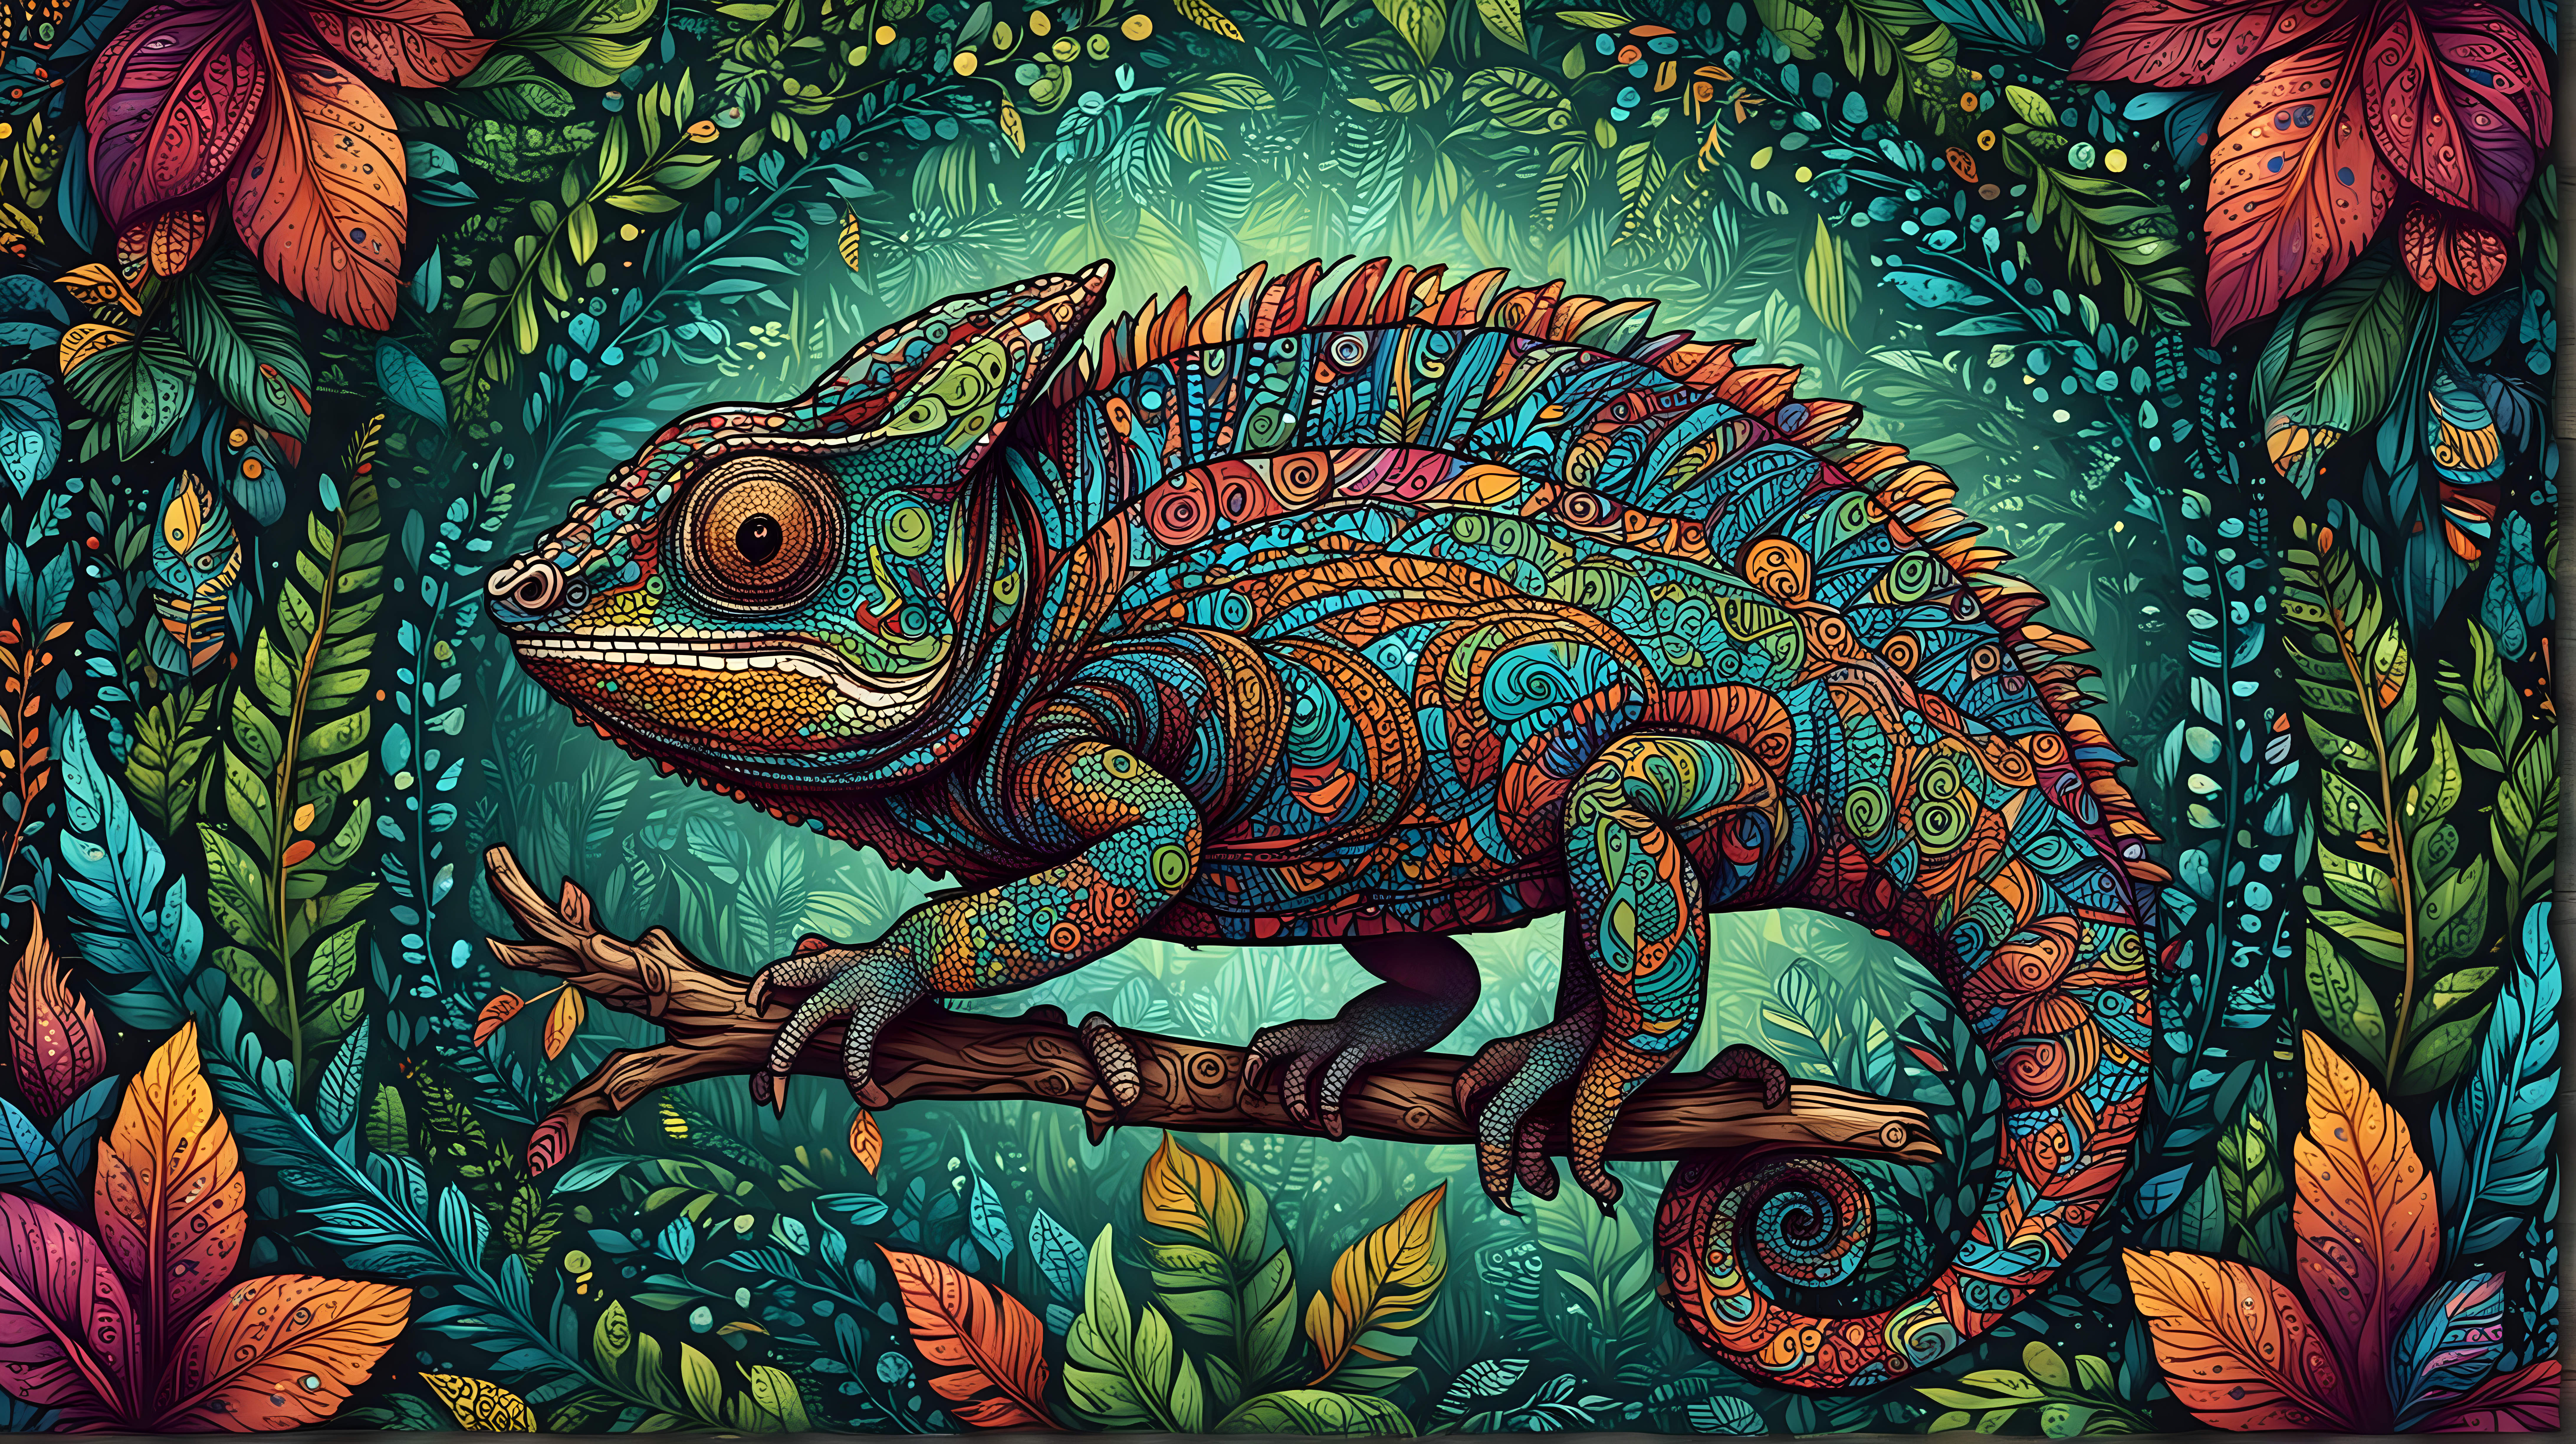 Vibrant Chameleon with Tribal Patterns in a Magical Mandala Forest